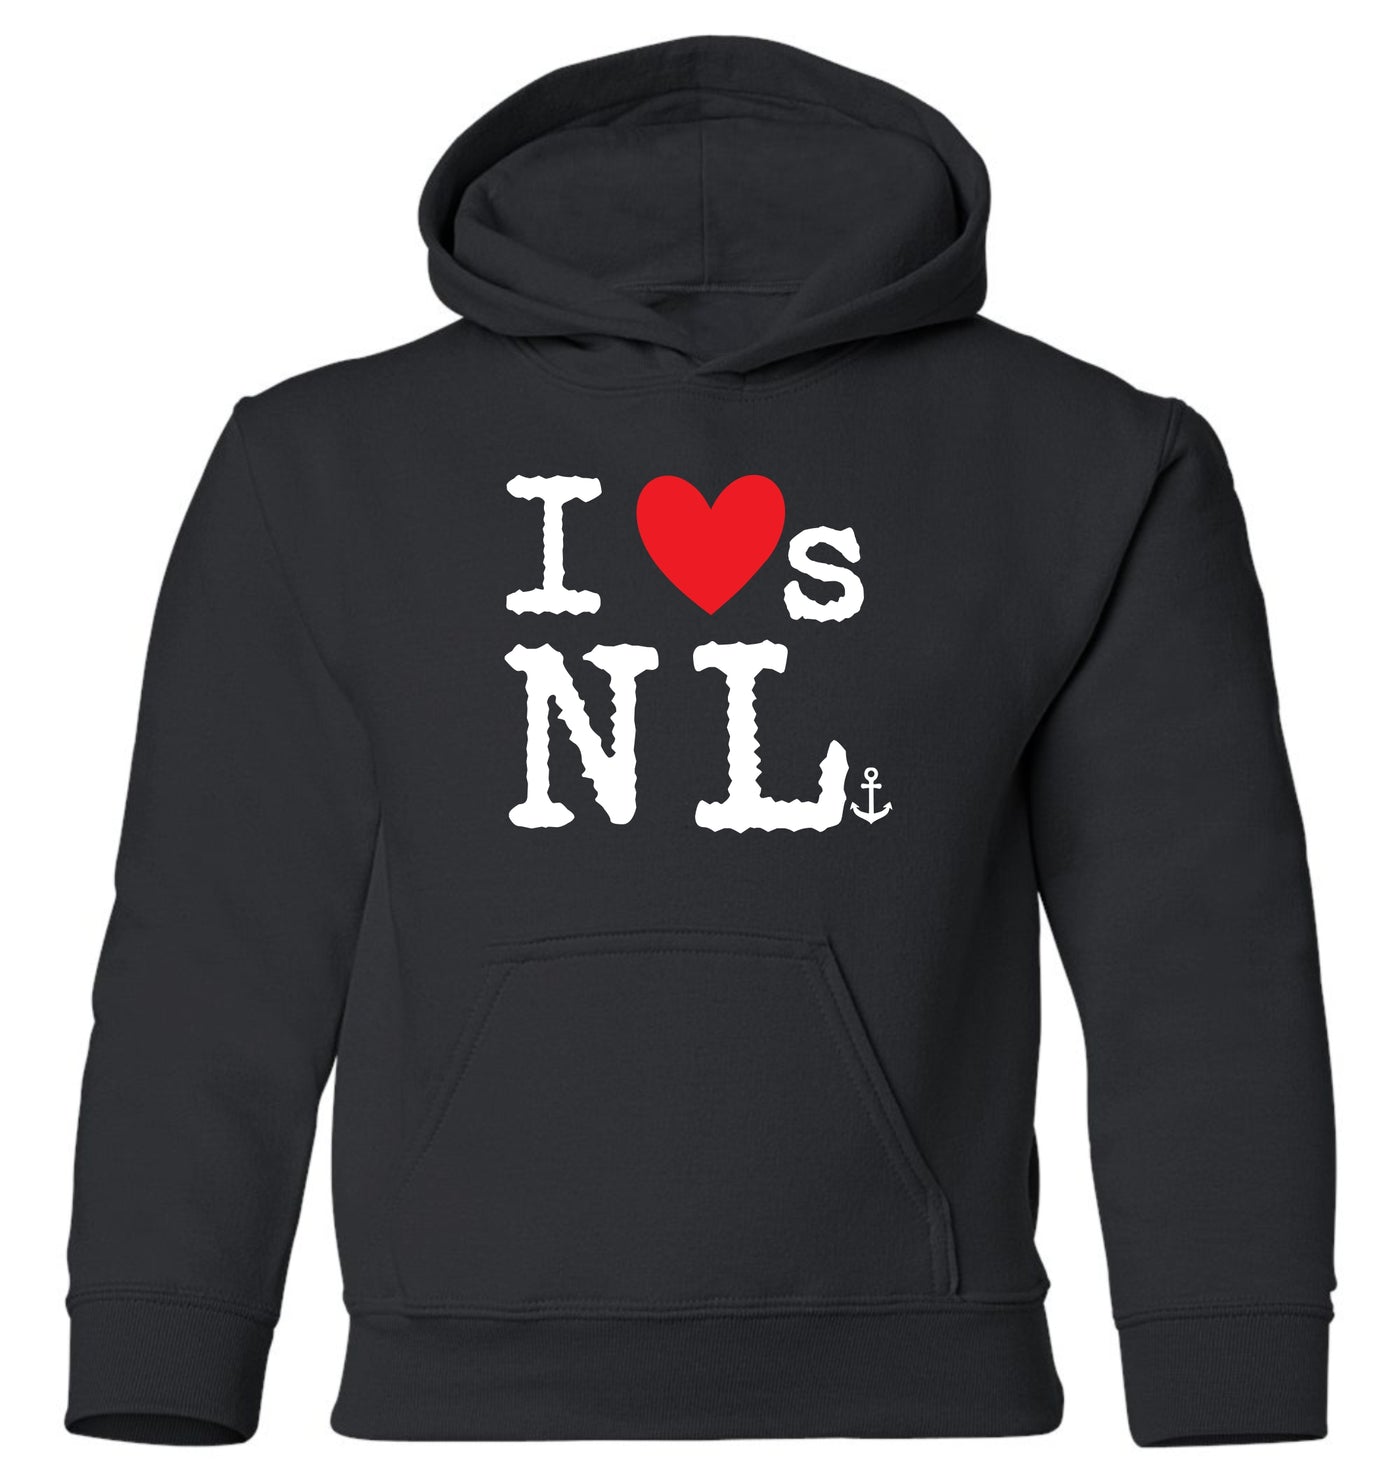 "I Loves NL" Red Heart Youth Hoodie